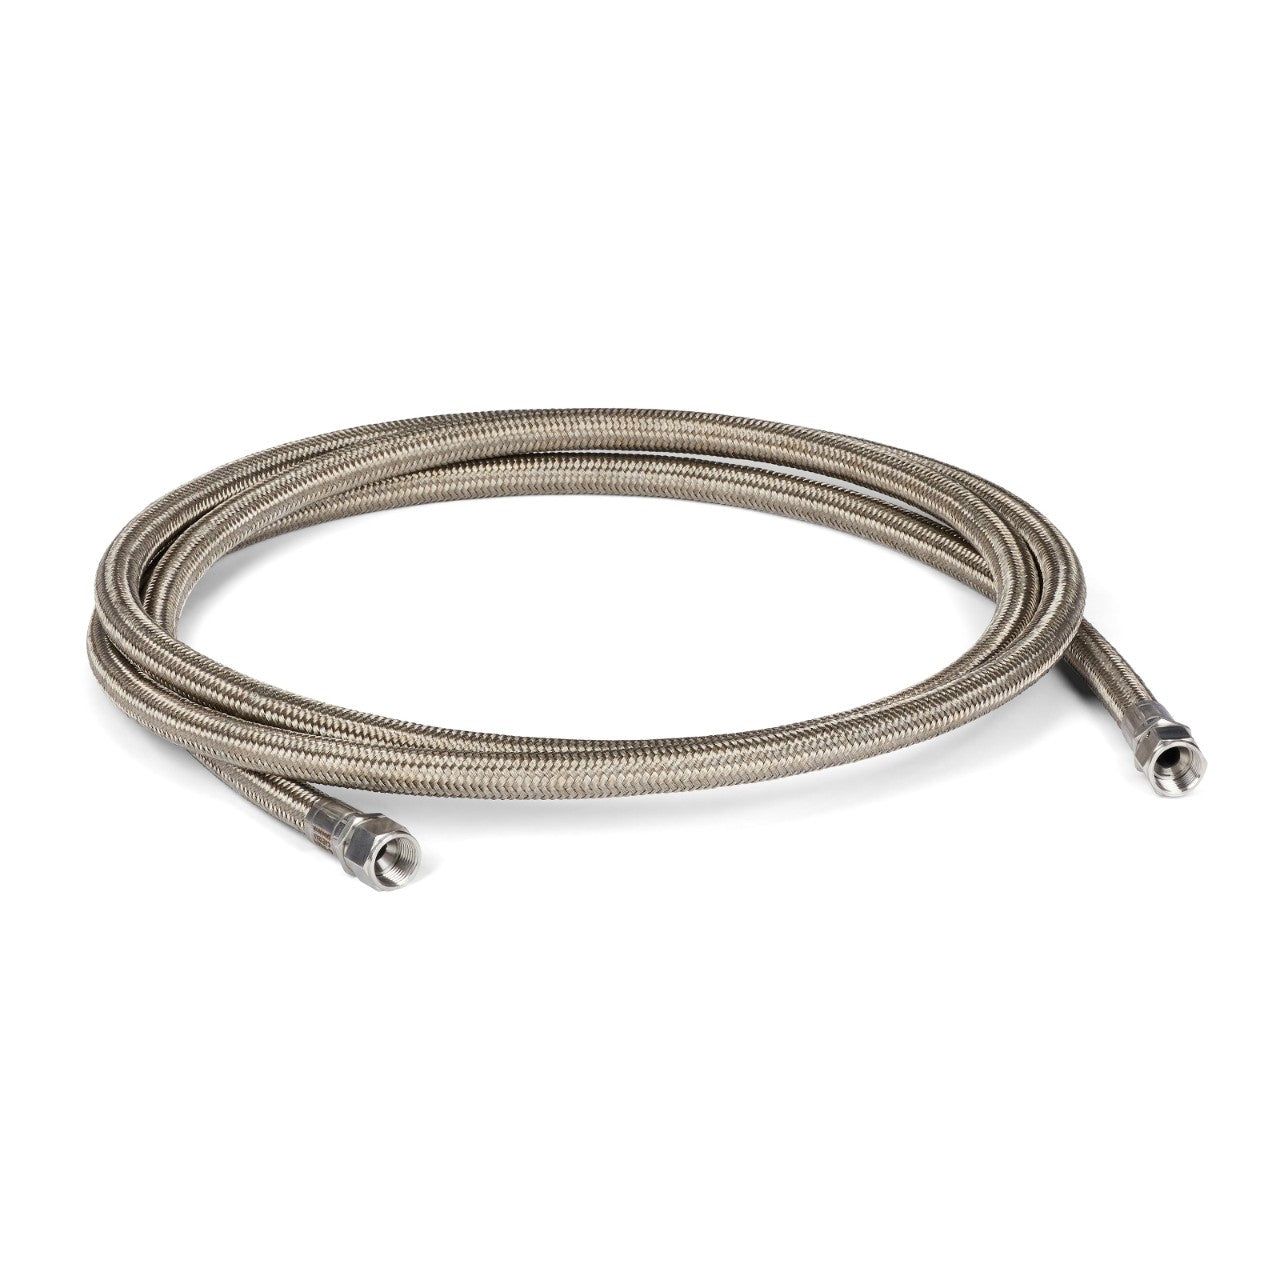 10 ft. (3.0 M) Stainless Steel Braided PTFE Ambient Hose,  No. 10 (0.495 in. / 12.6 mm ID)